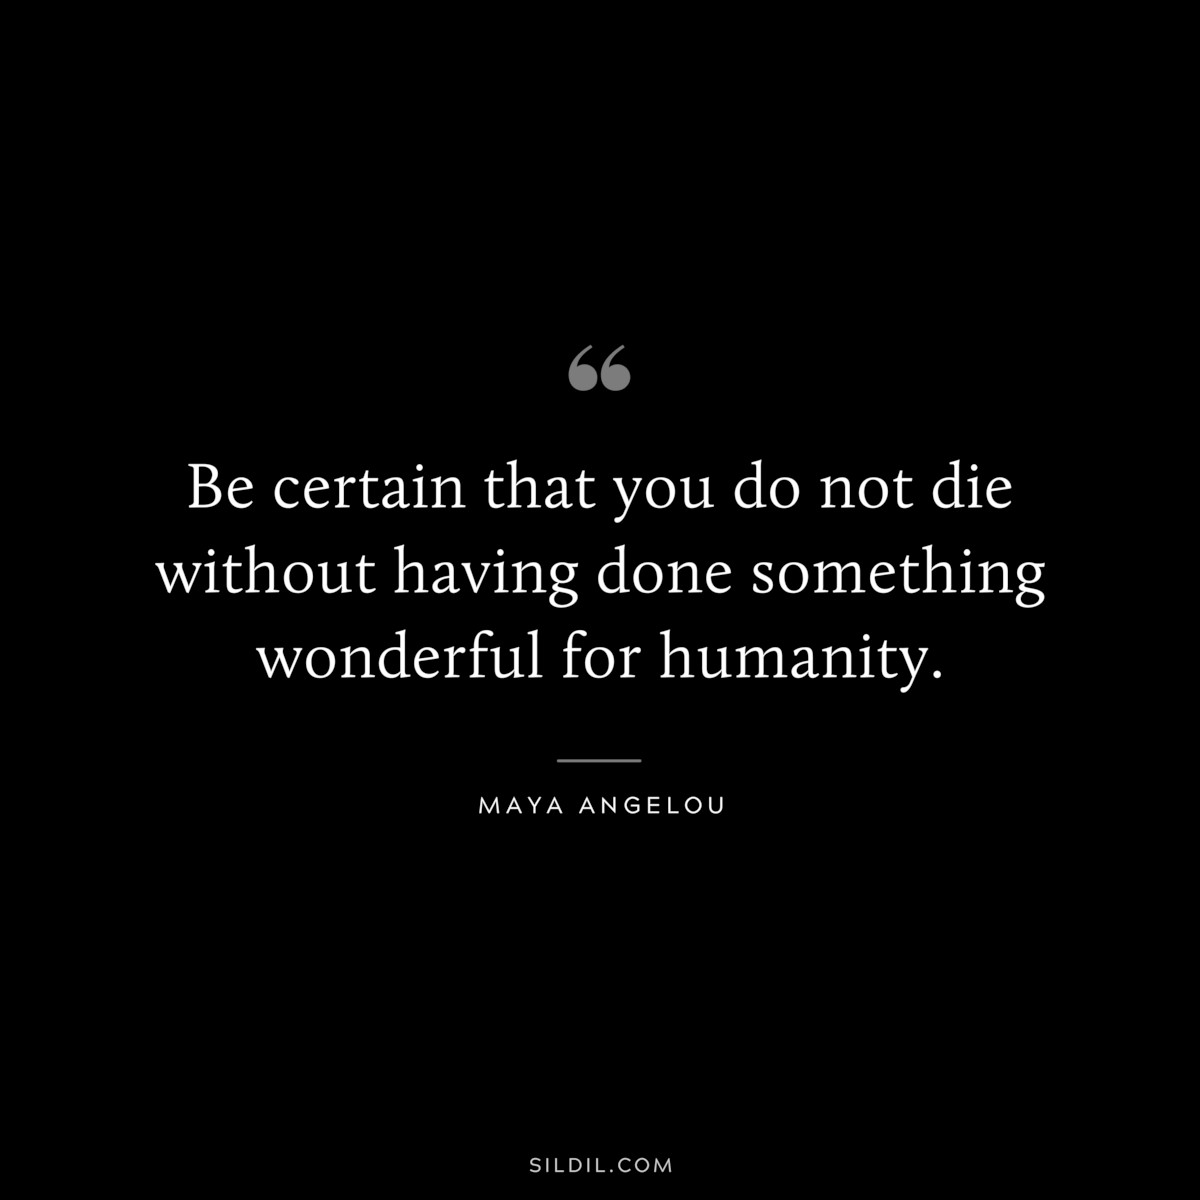 Be certain that you do not die without having done something wonderful for humanity. ― Maya Angelou